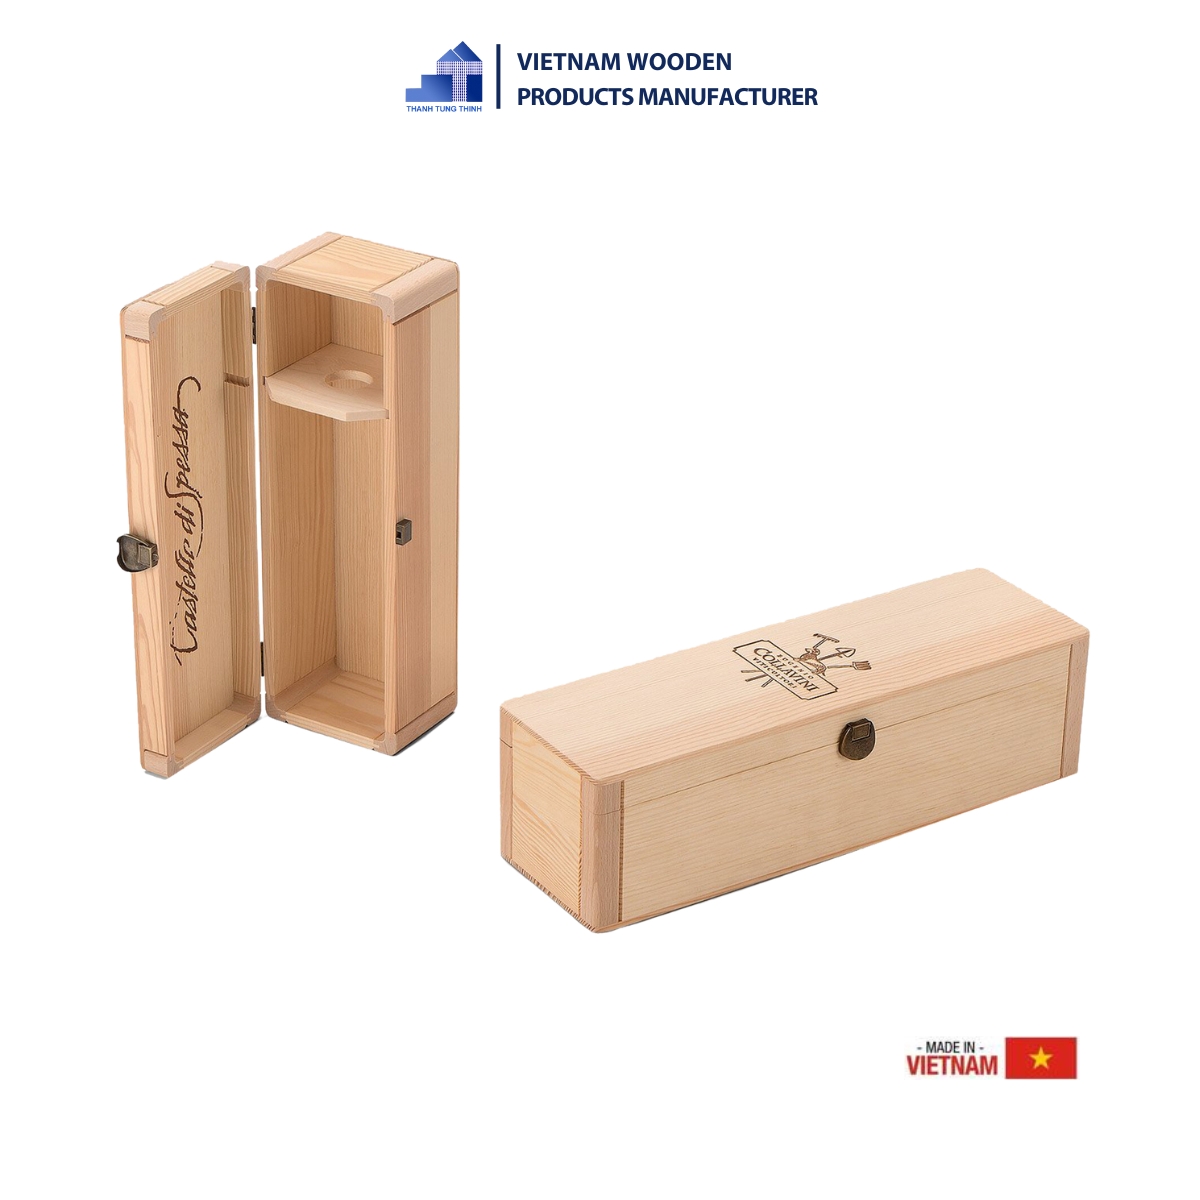 Basic Single-bottle Wooden Wine Box with Snap-on Lid Design [WB001]